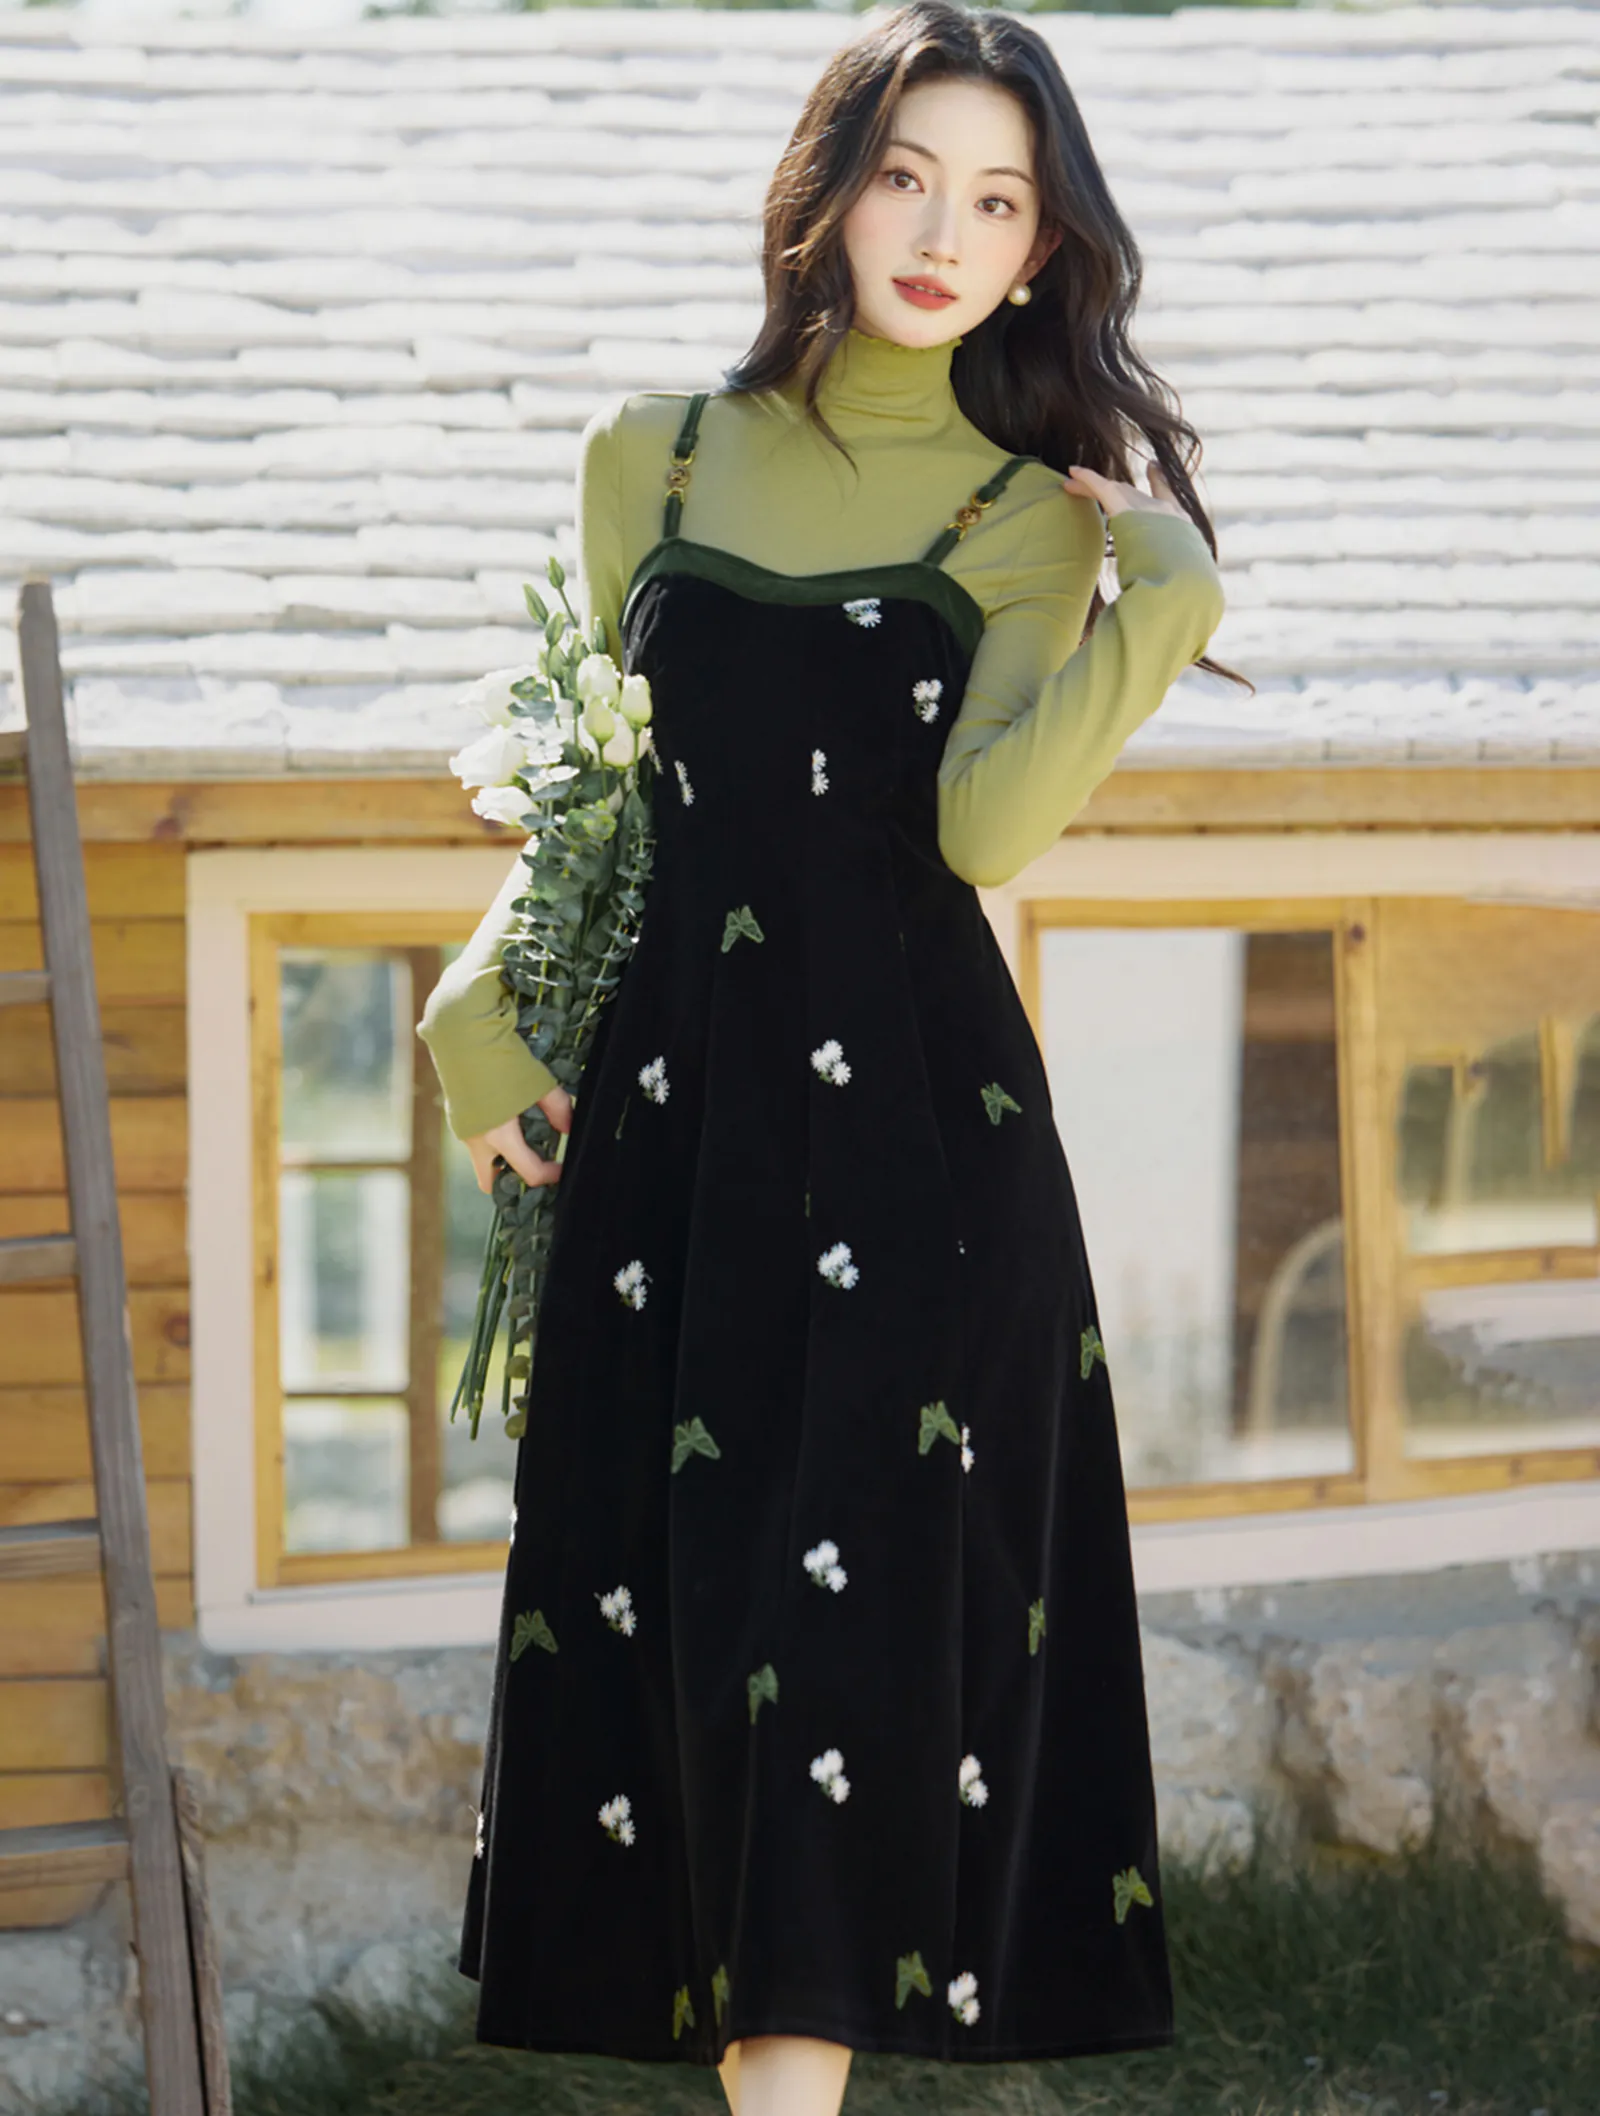 Retro Embroidery Black Velvet Slip Dress with Green Knit Sweater Suit01